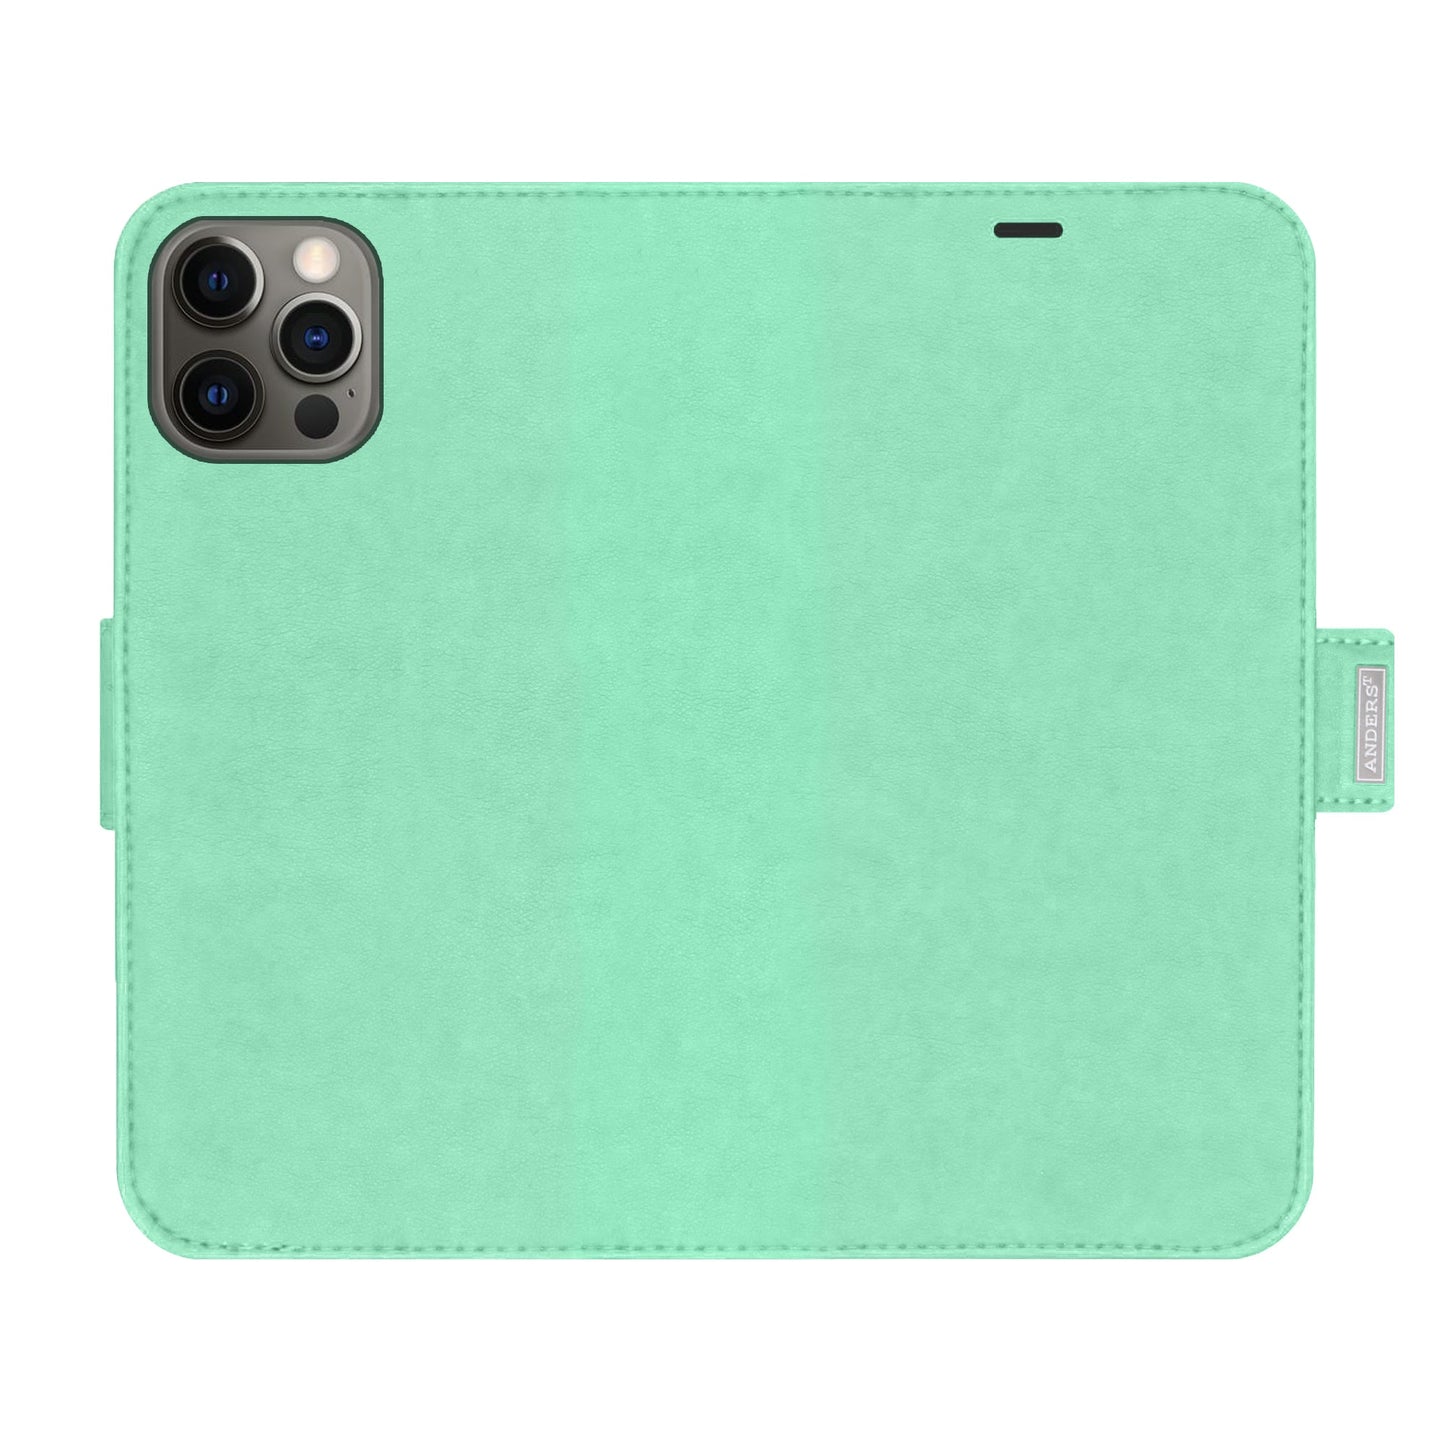 Uni Mint Victor Case for iPhone 12 Pro Max